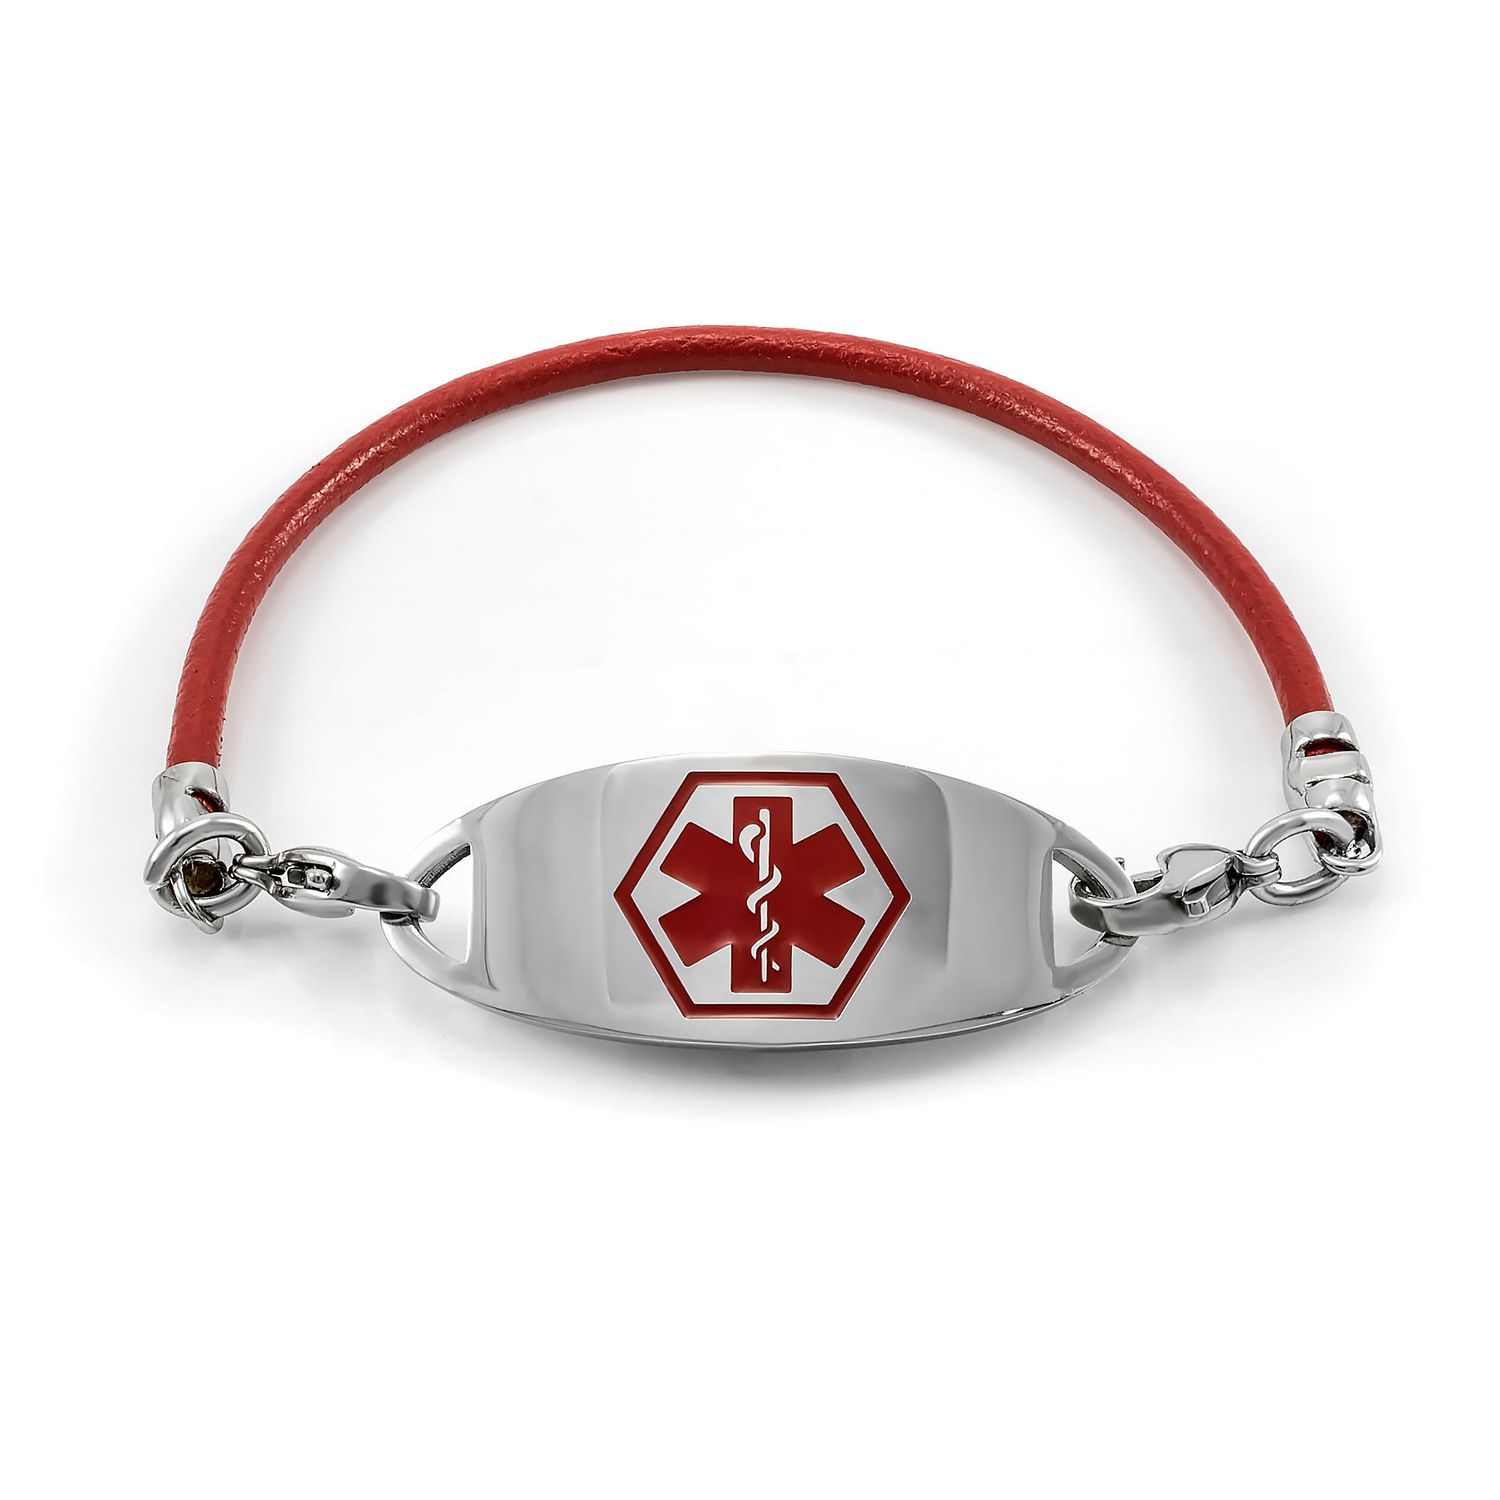 Steel Red Enamel Tag Engraving Incl. MedicEngraved Customized Leather Medical ID Bracelet w/ 316L St 